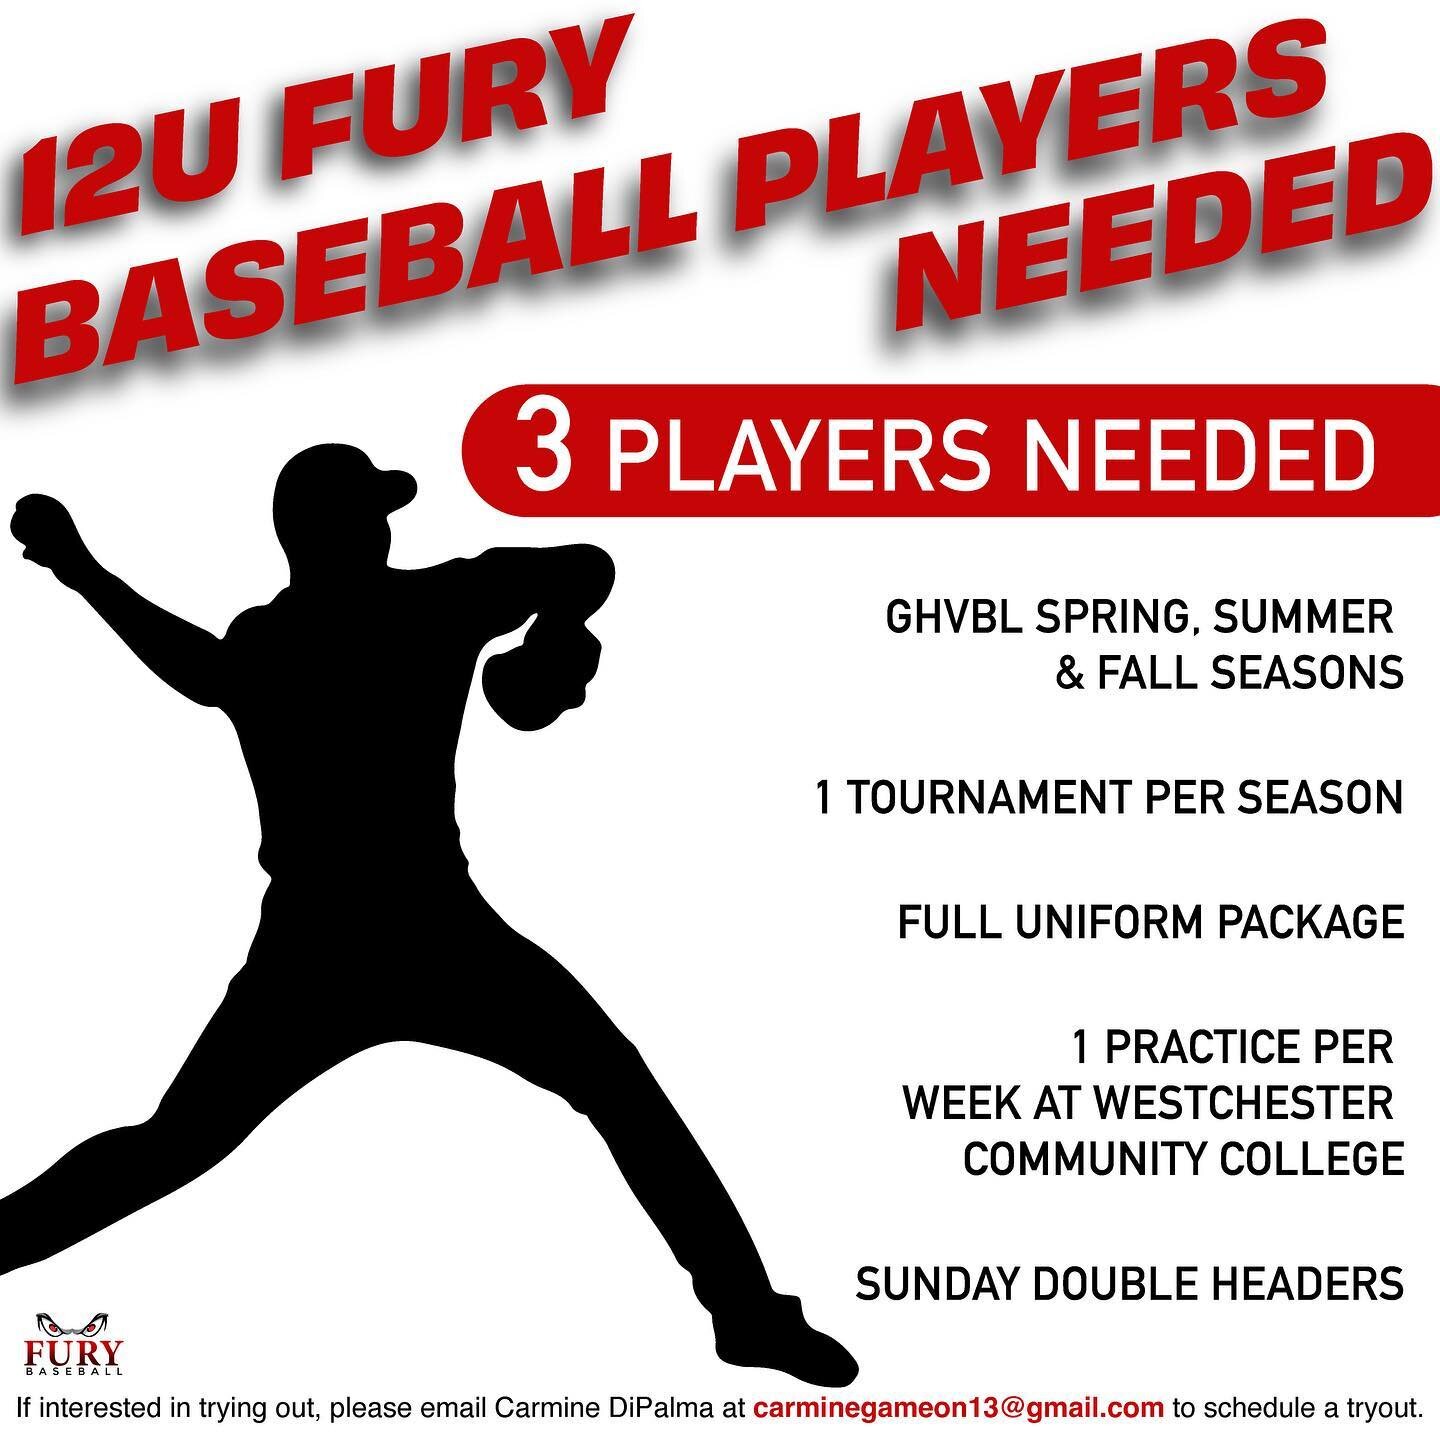 Not too late to join Fury for the Spring (and beyond)! Call us at 914-592-6613 or email Carmine at carminegameon13@gmail.com to set up a tryout today!